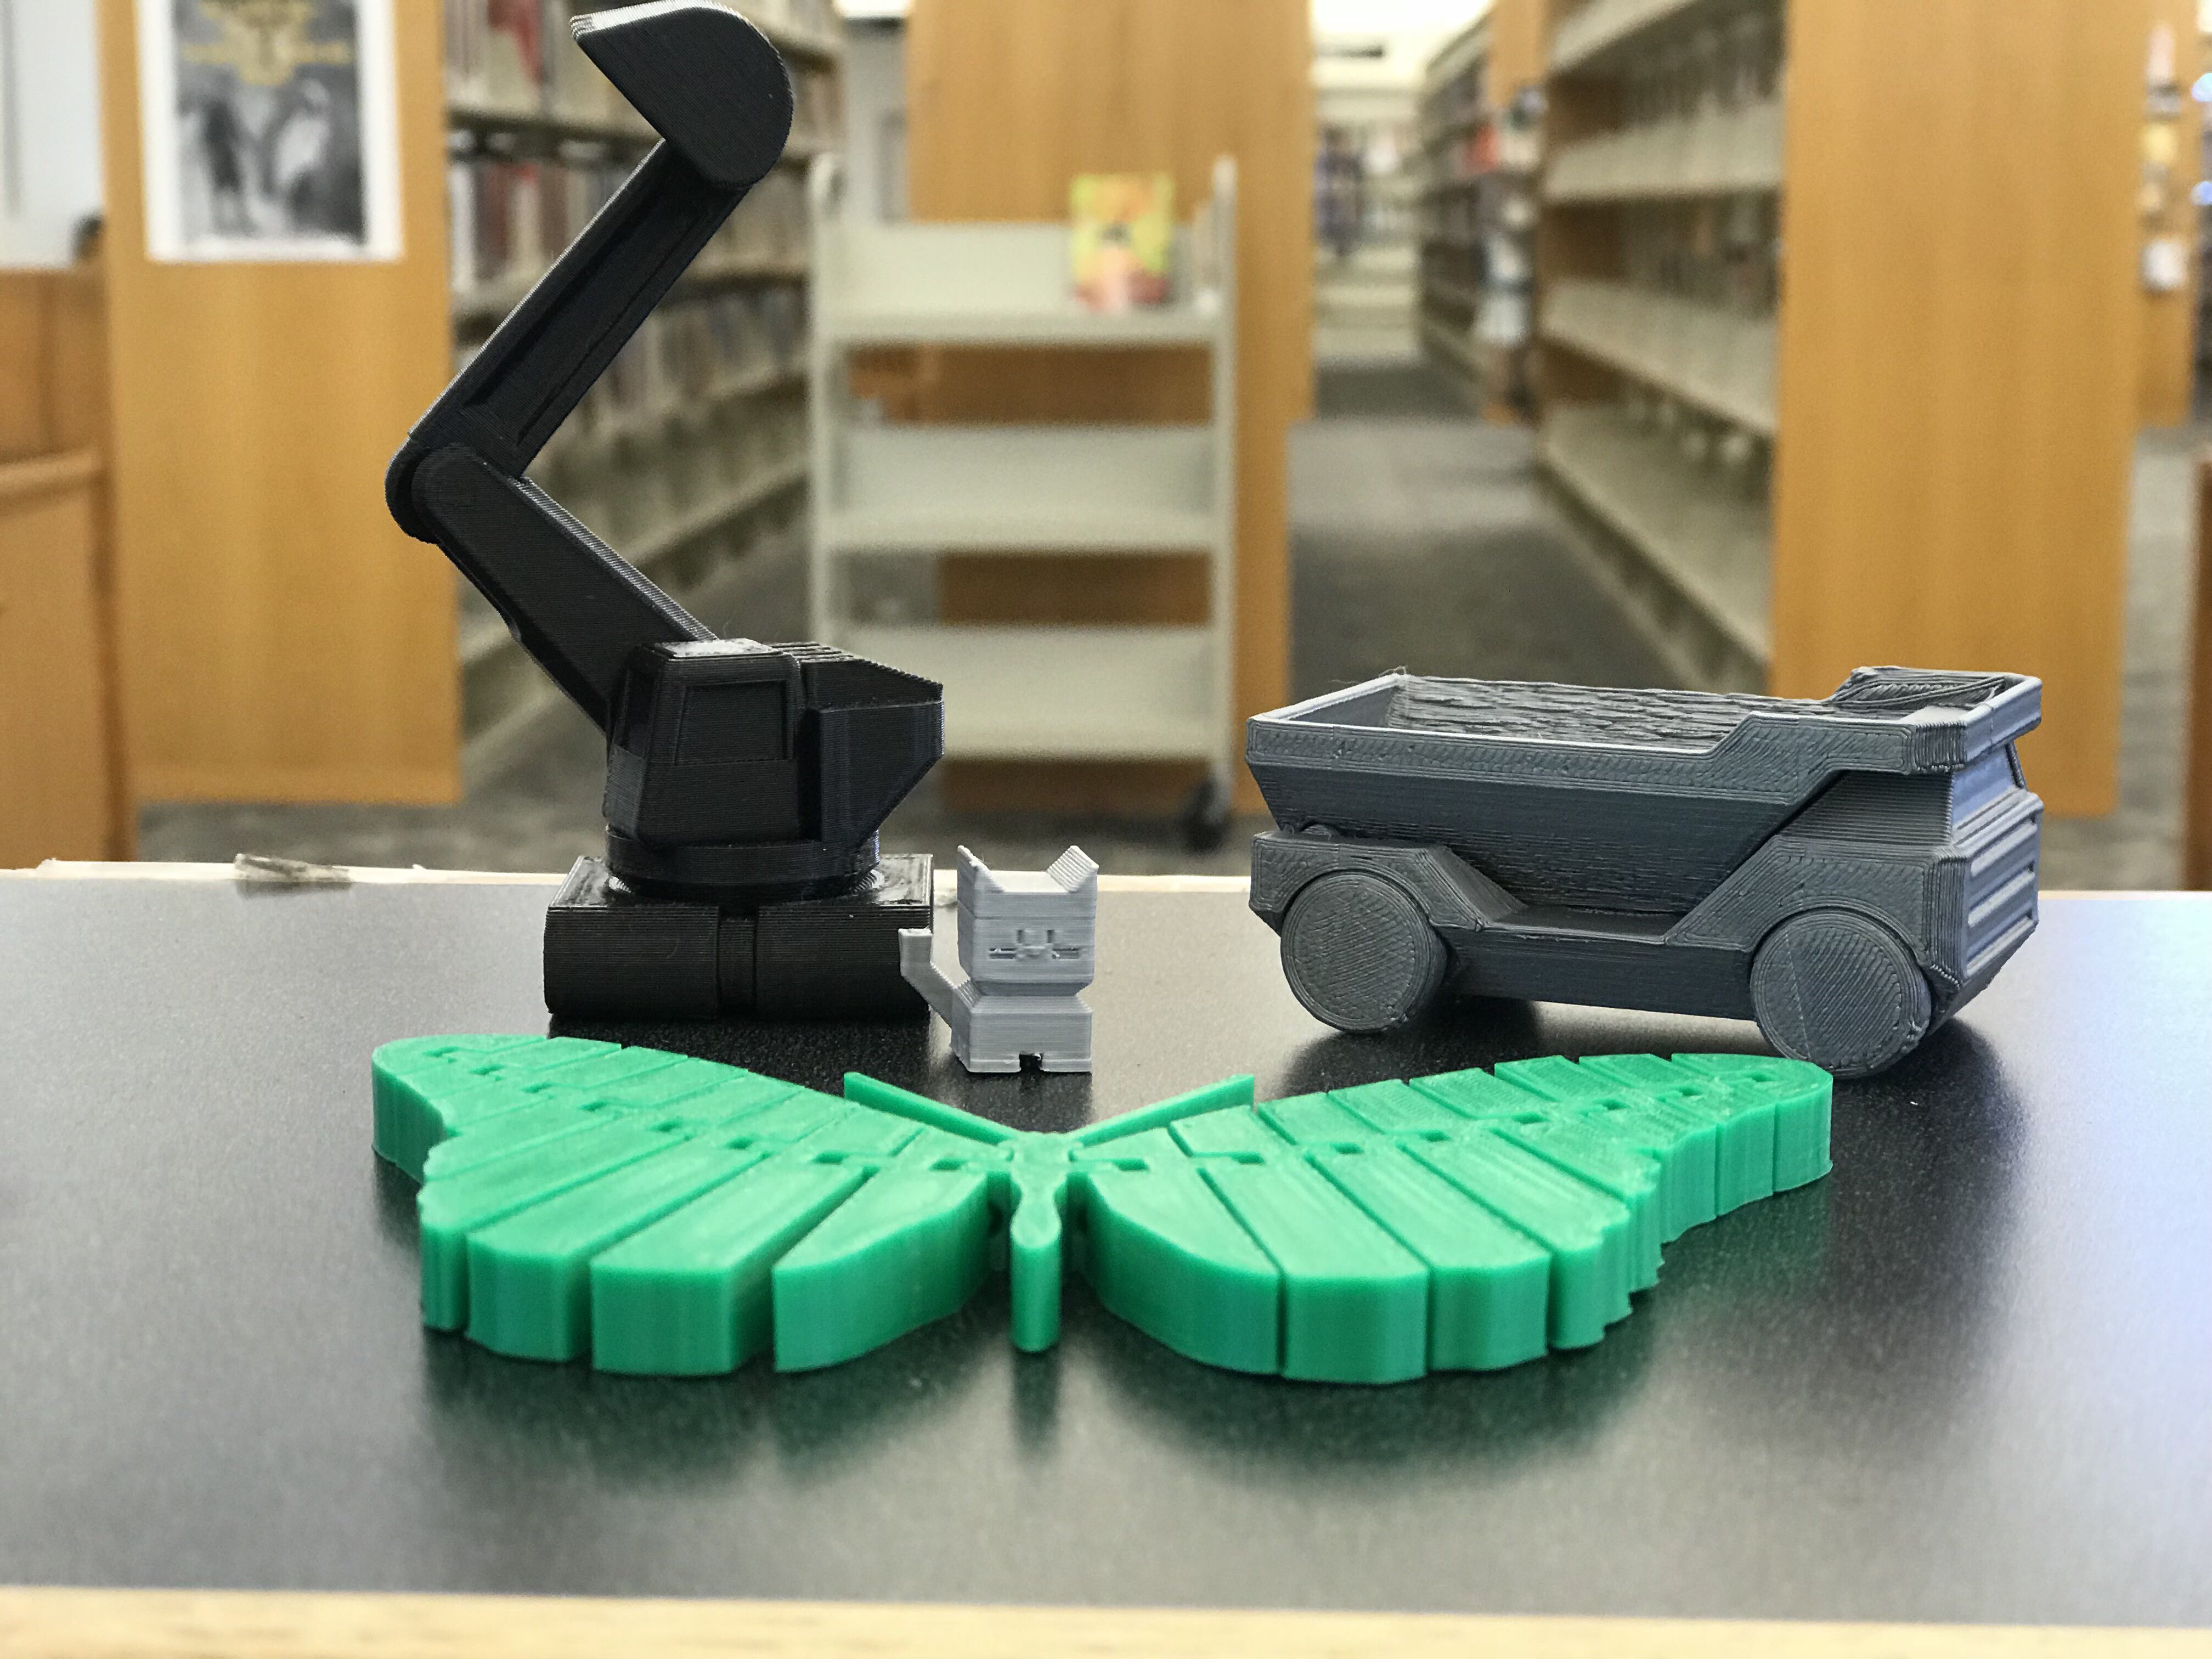 3D printed objects made at the library